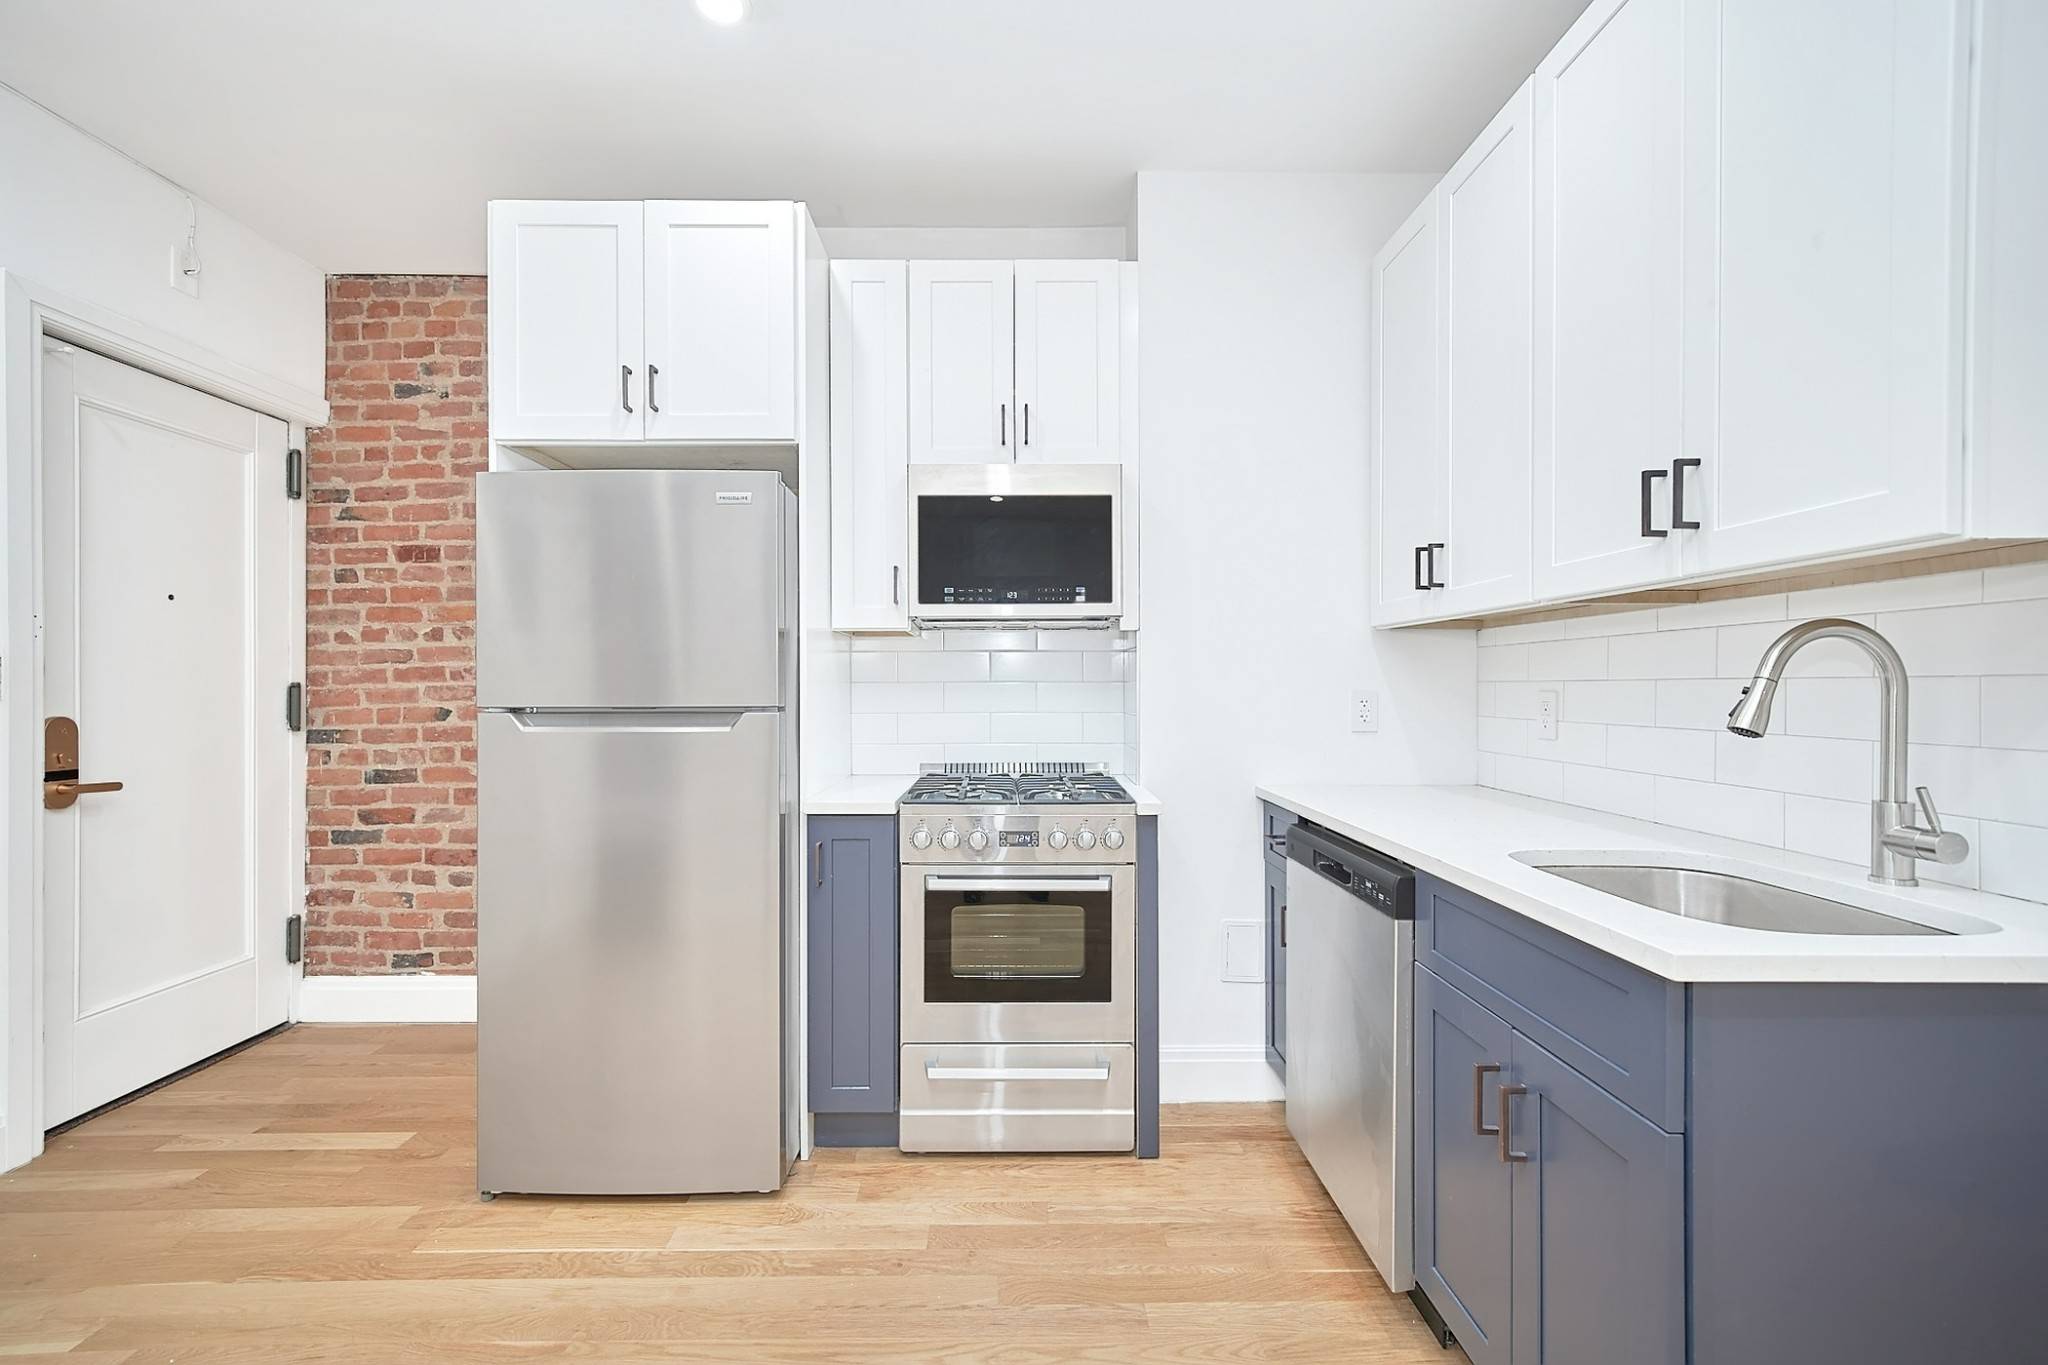 Beautiful 3Bedroom Unit in the heart of the West Village Apartment Details Bright windows with sunny exposures Updated unit with SS Appliances Strip Wood Flooring Building Amenities Neighborhood Super Well ...